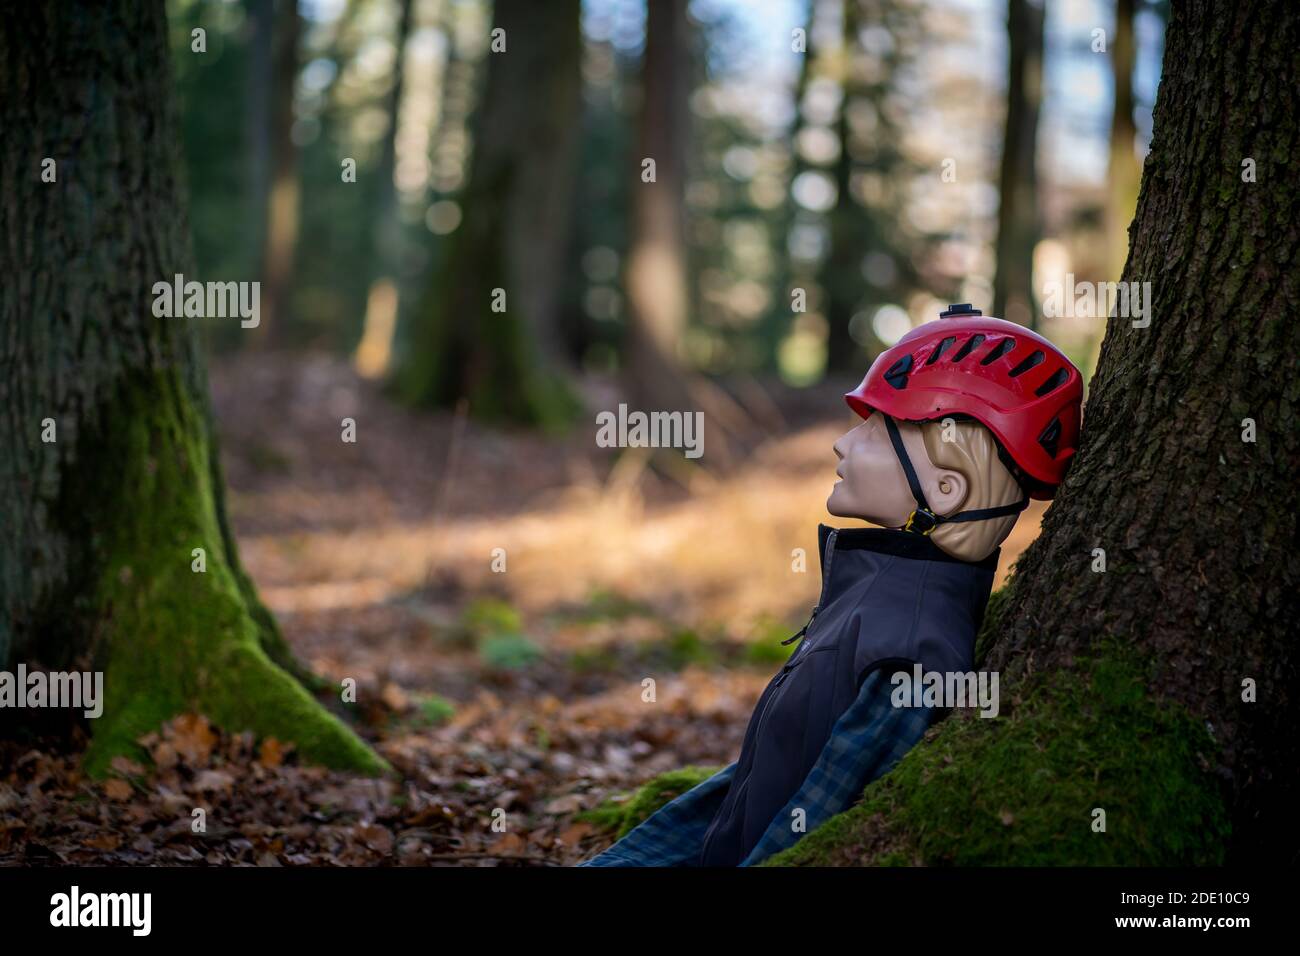 Single resuscitation dummy in the forest Stock Photo